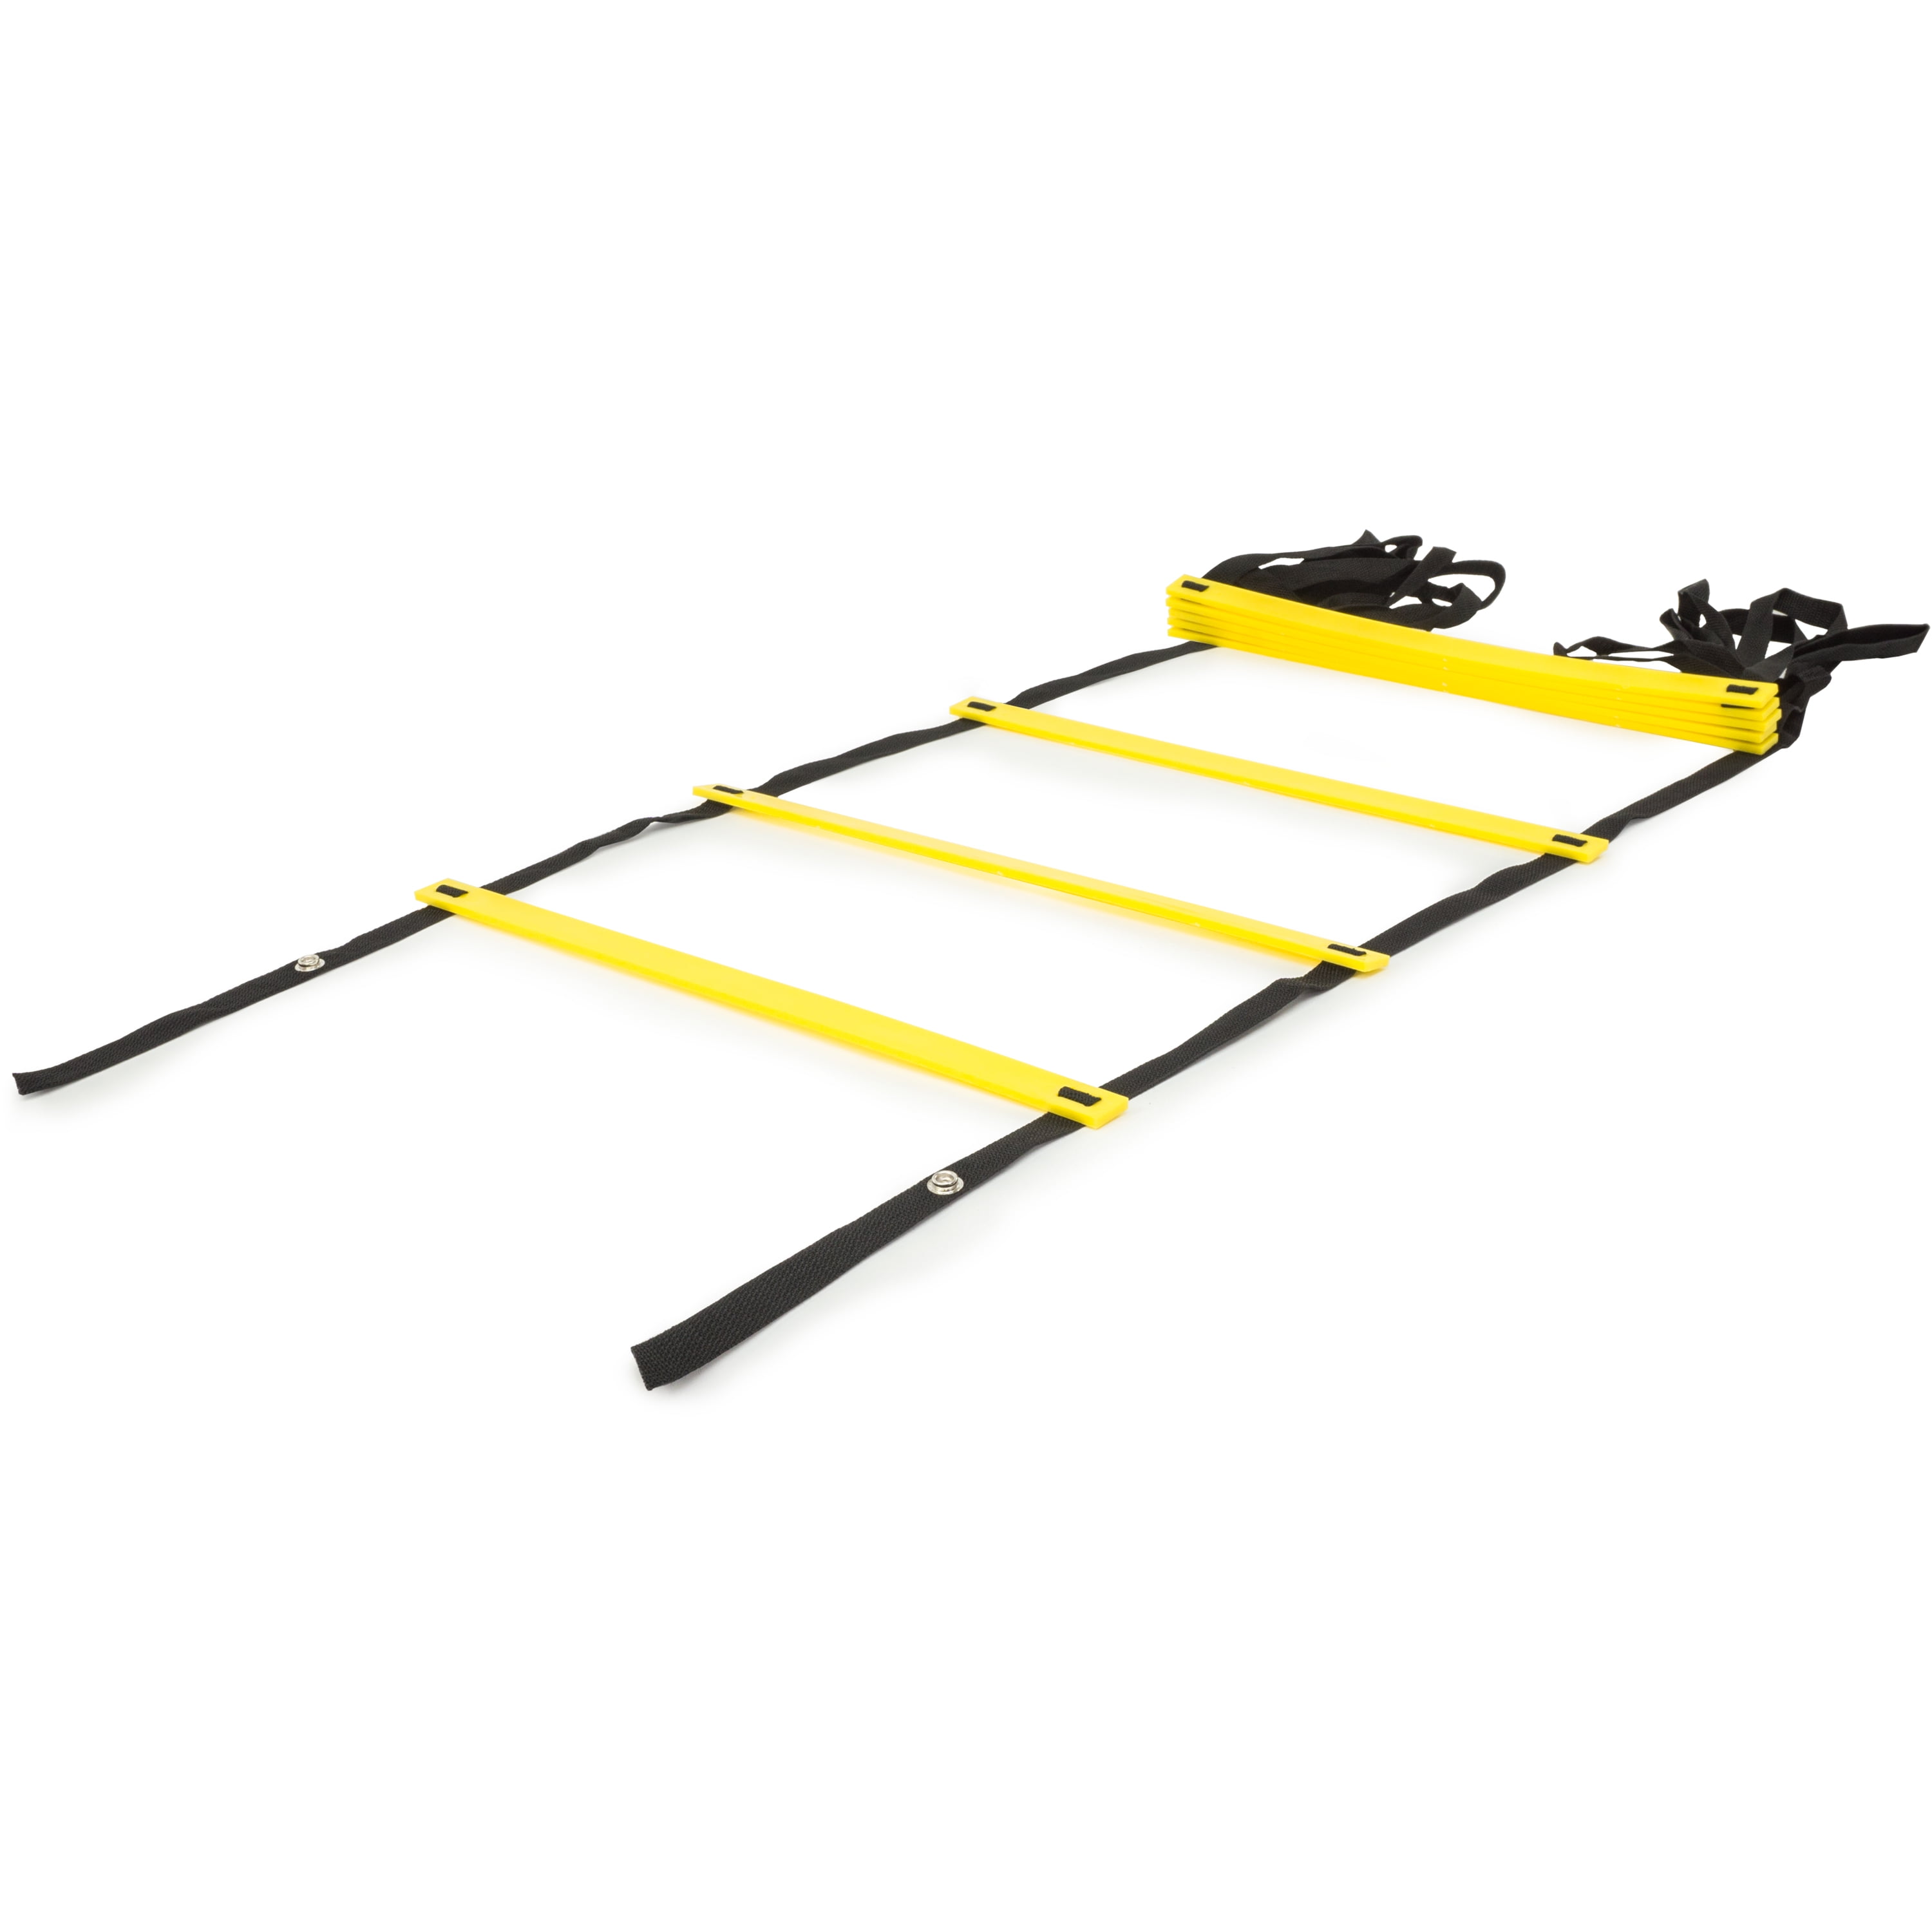 GHB Pro Agility Ladder Training Speed Flat Rung with Carrying Bag 